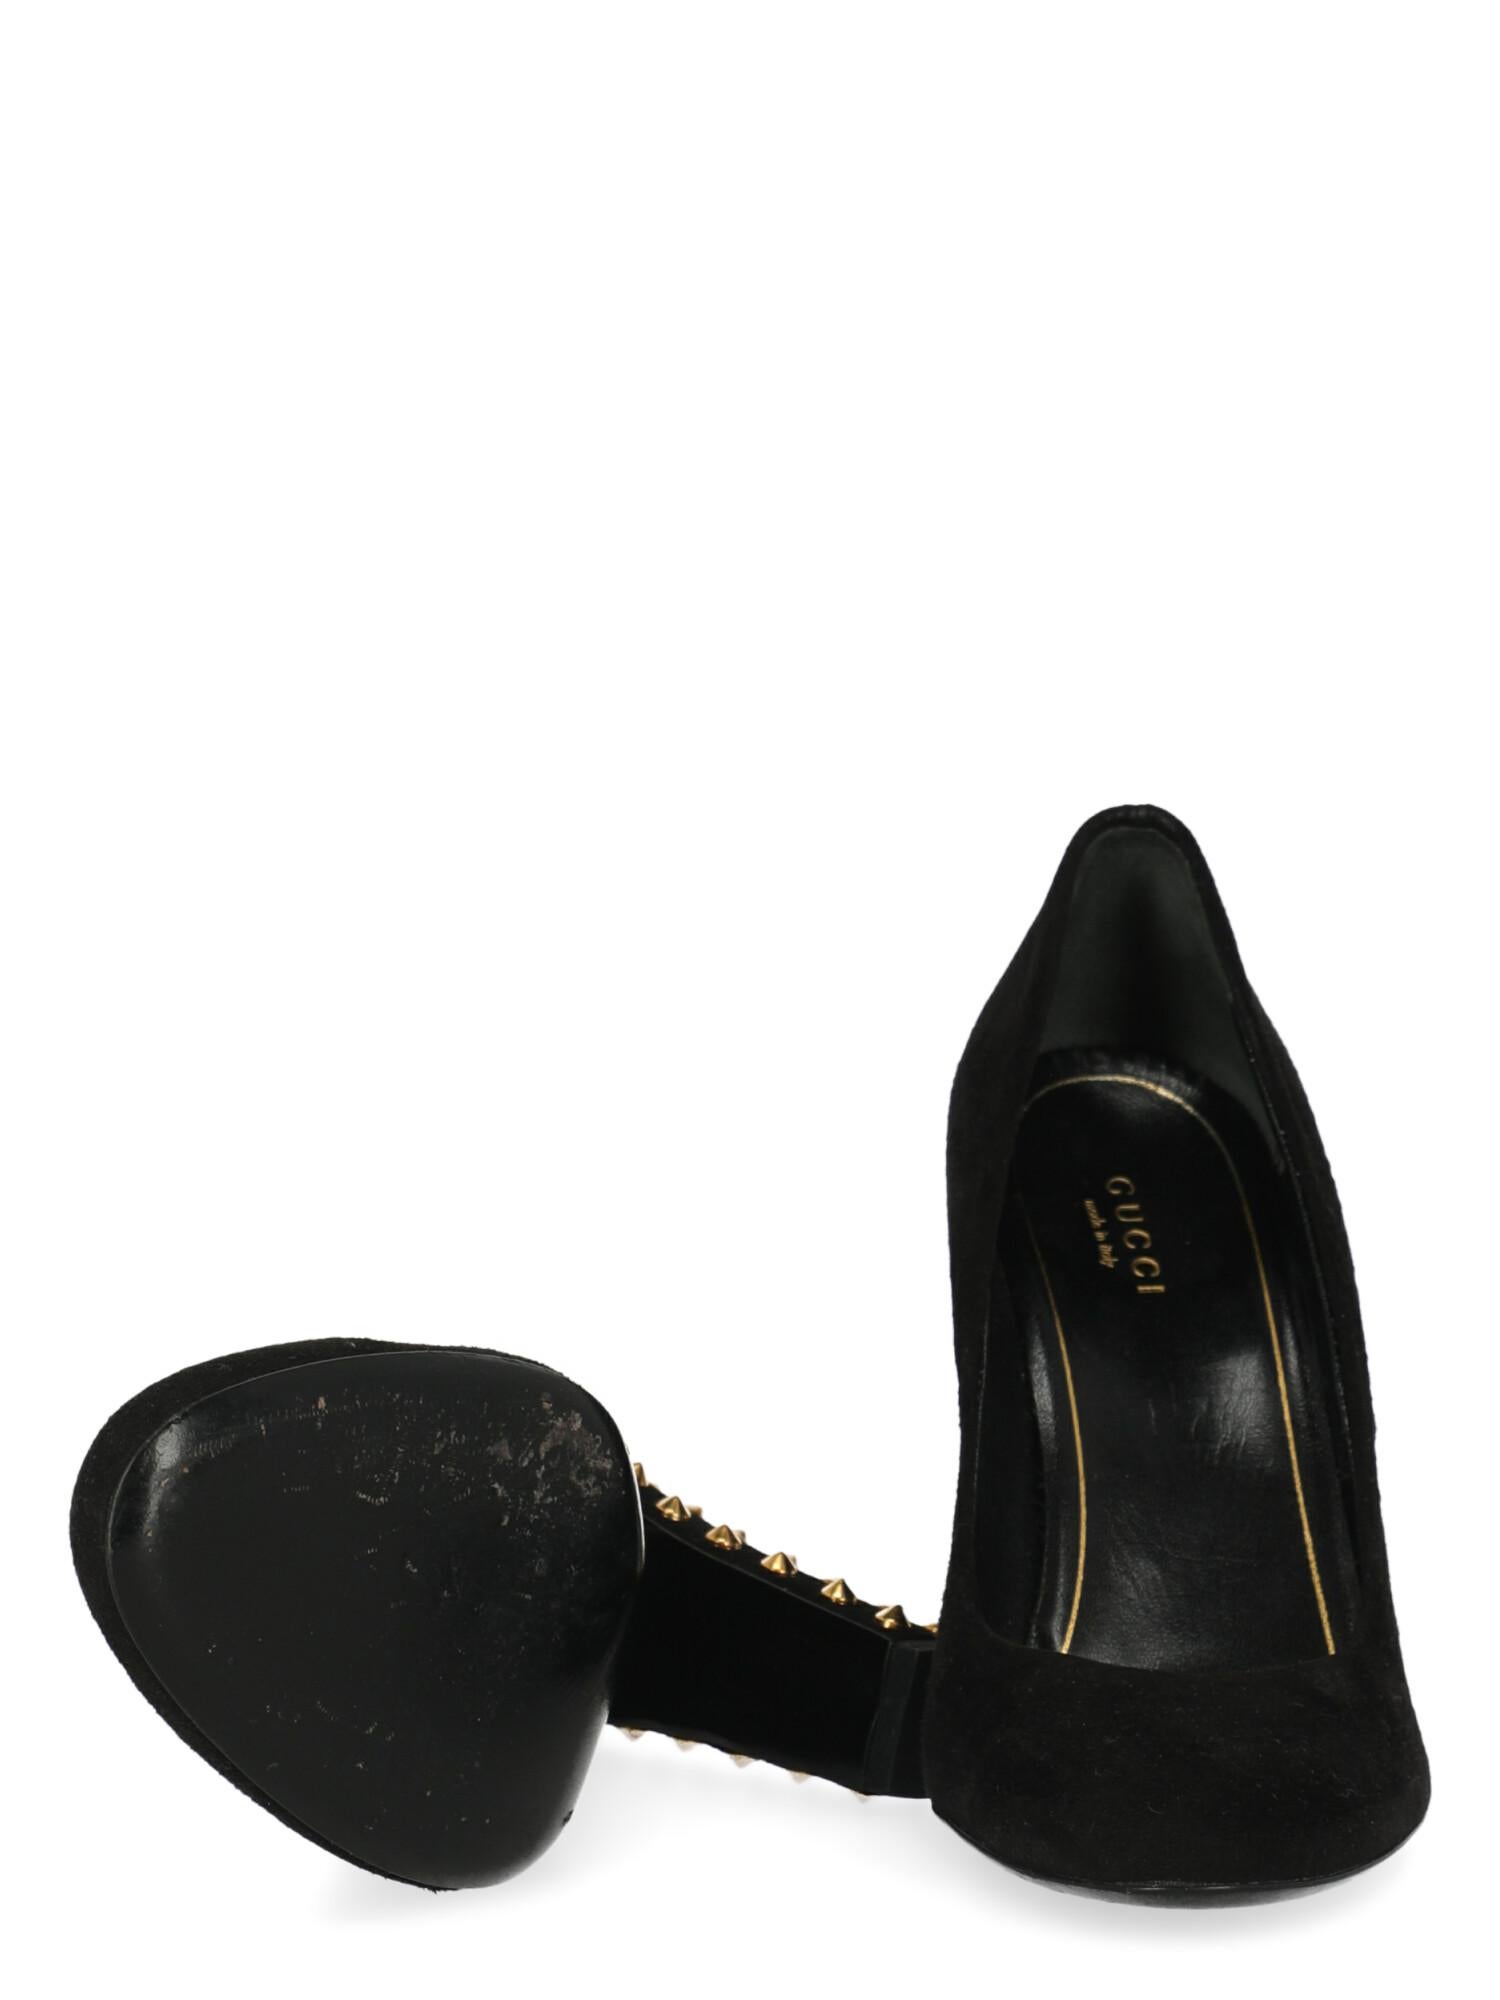 Gucci Women Pumps Black, Gold Leather EU 37.5 In Good Condition For Sale In Milan, IT